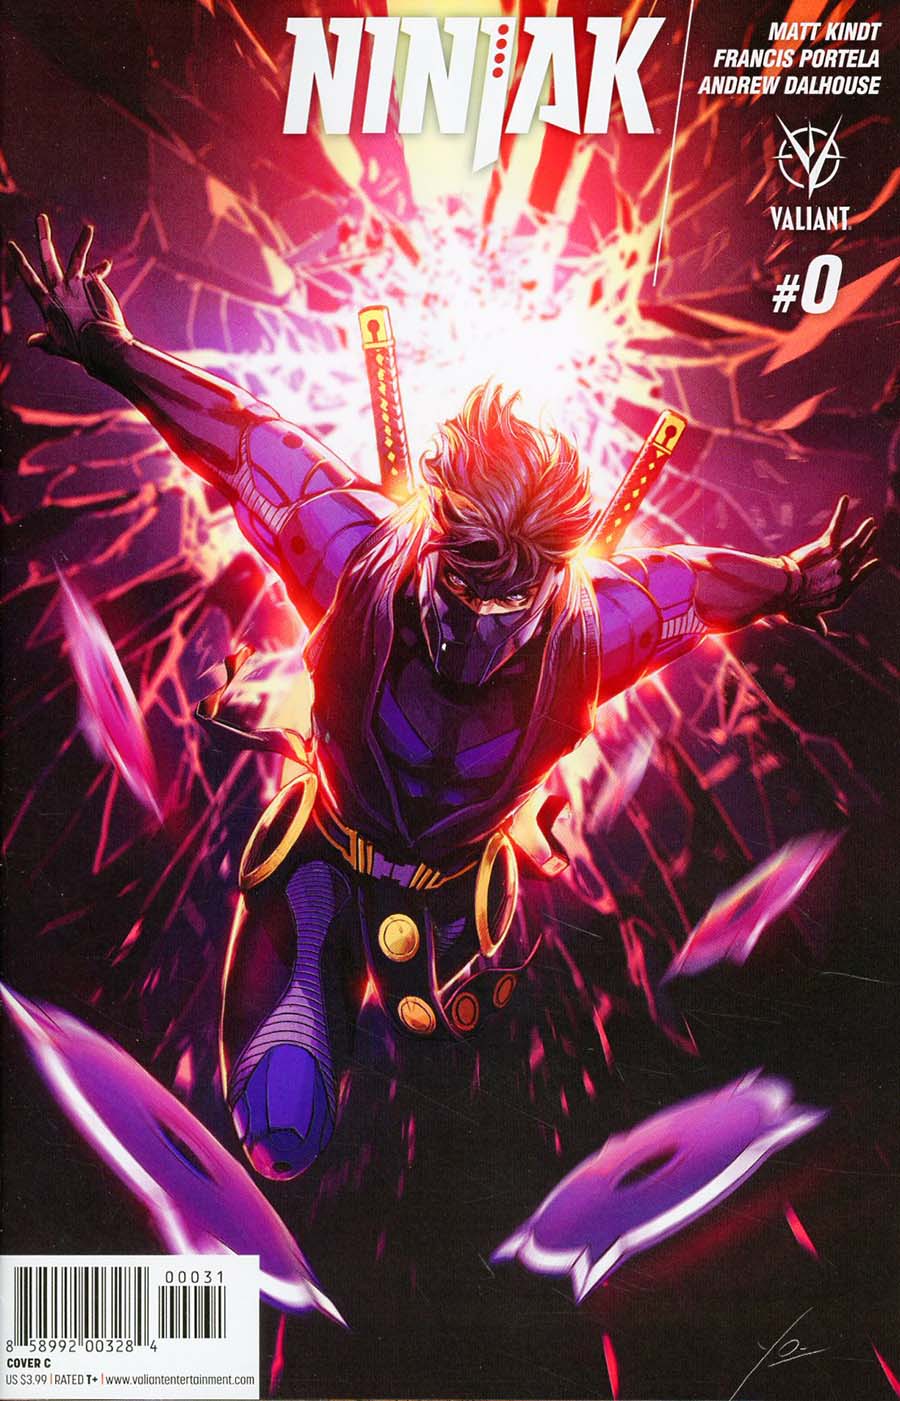 Ninjak Vol 3 #0 Cover C Variant Yama Orce Cover